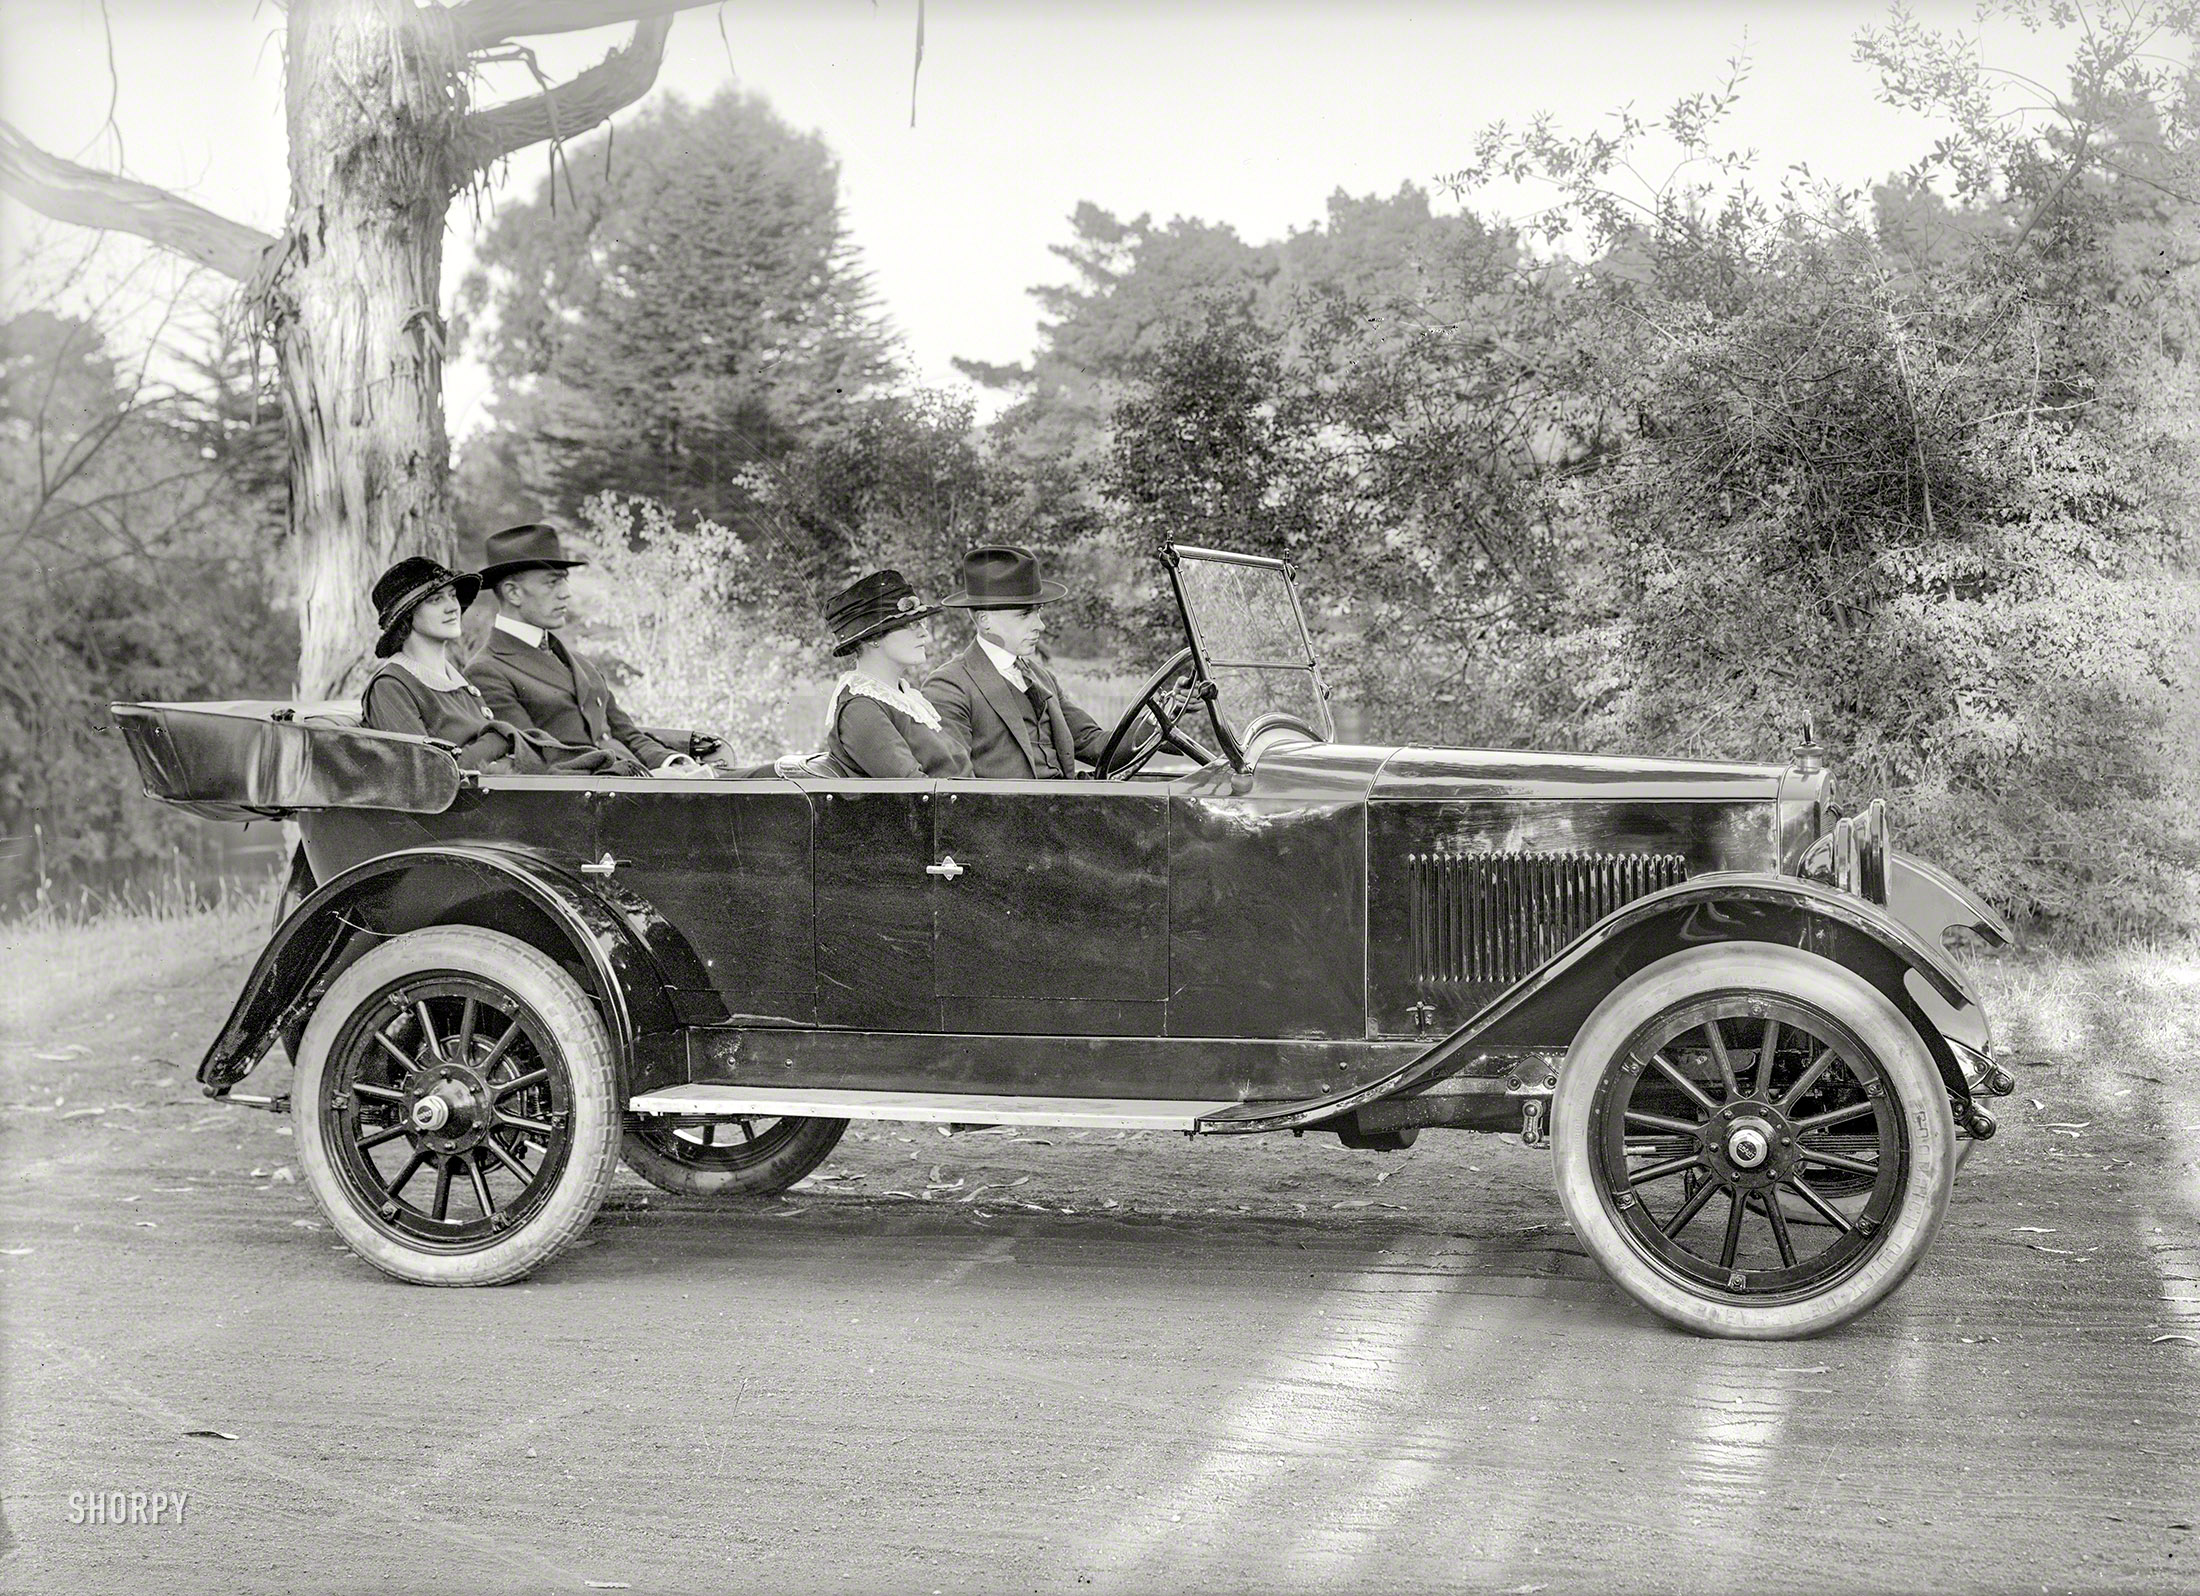 San Francisco circa 1920. "Grant touring car." The party last seen here, somewhat rearranged. 5x7 glass negative by Christopher Helin. View full size.